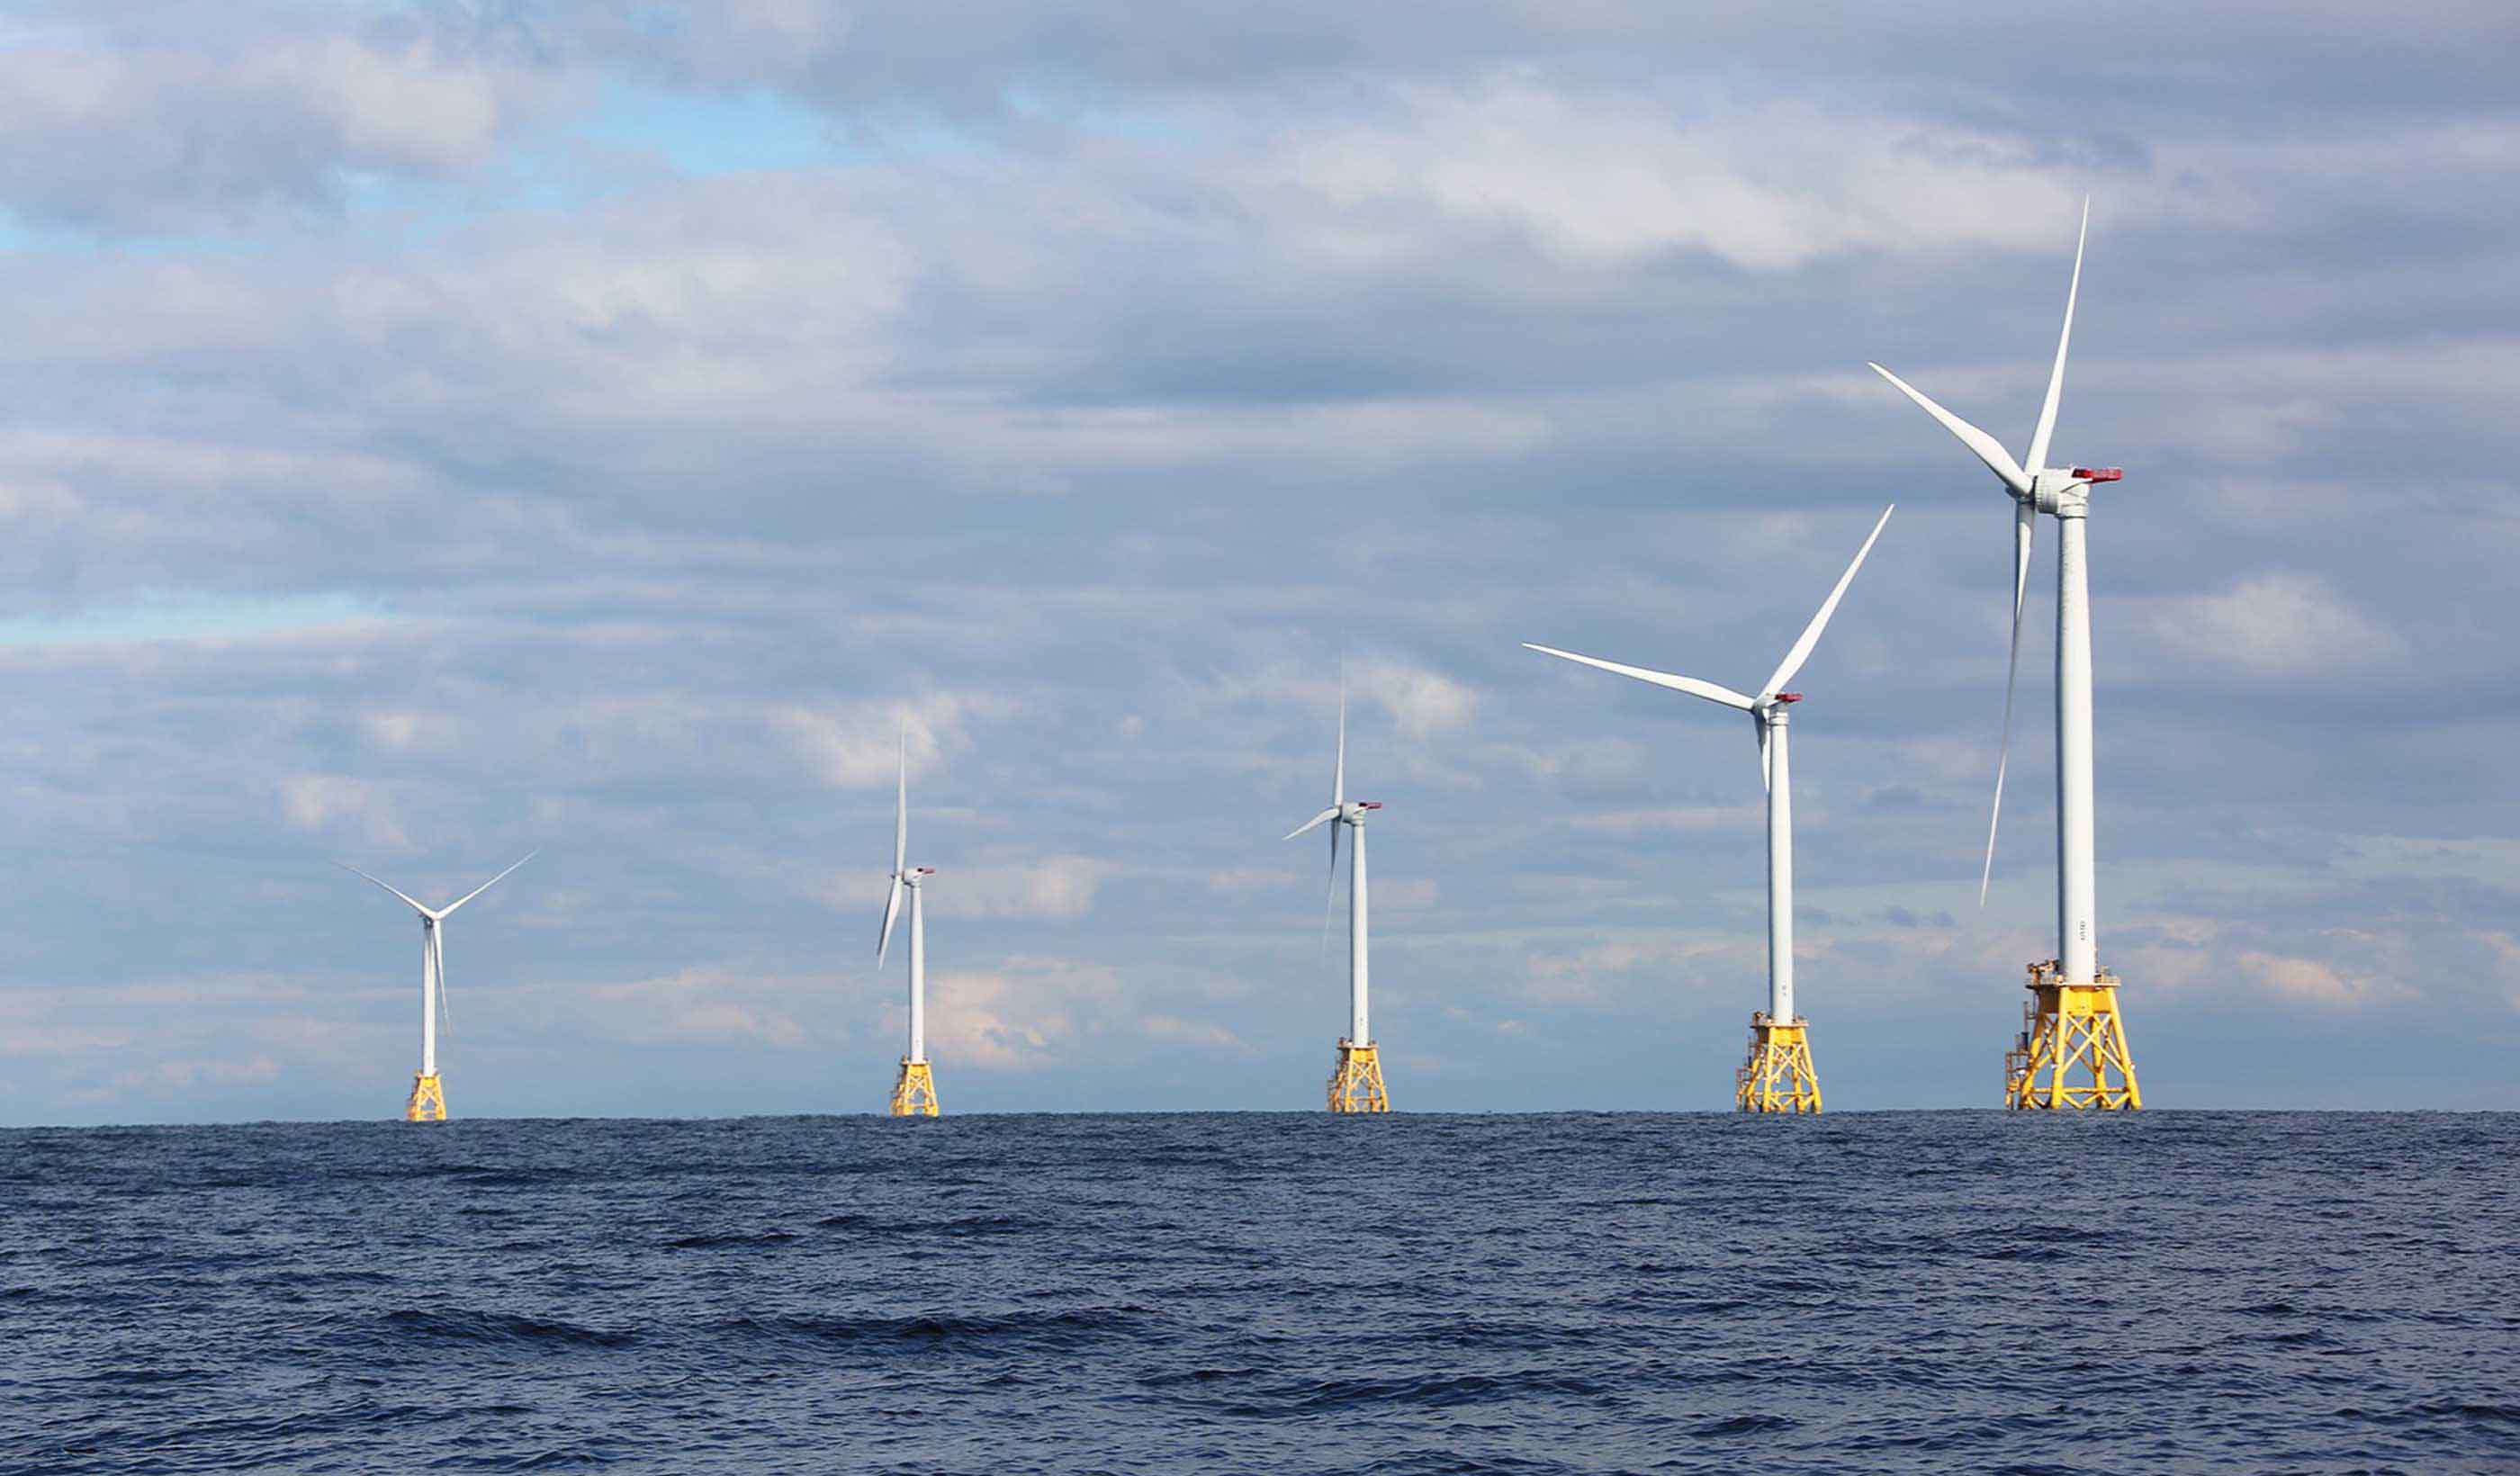 How can offshore wind power a more sustainable energy infrastructure?